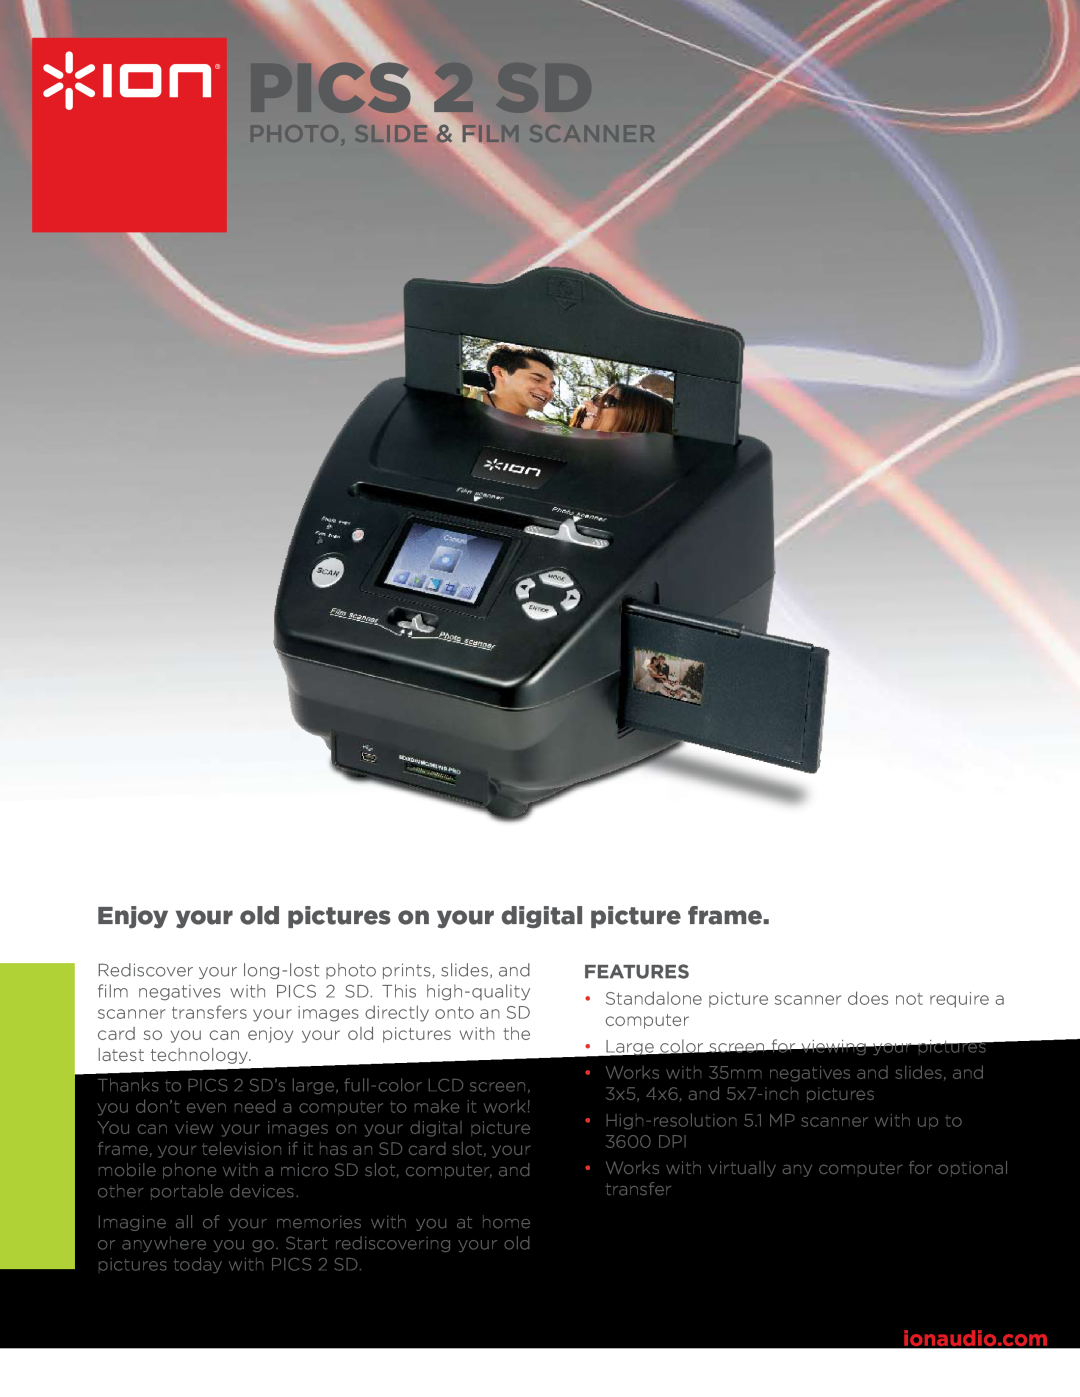 ION PICS 2 SD specifications Photo, Slide & Film Scanner, Enjoy your old pictures on your digital picture frame, Features 